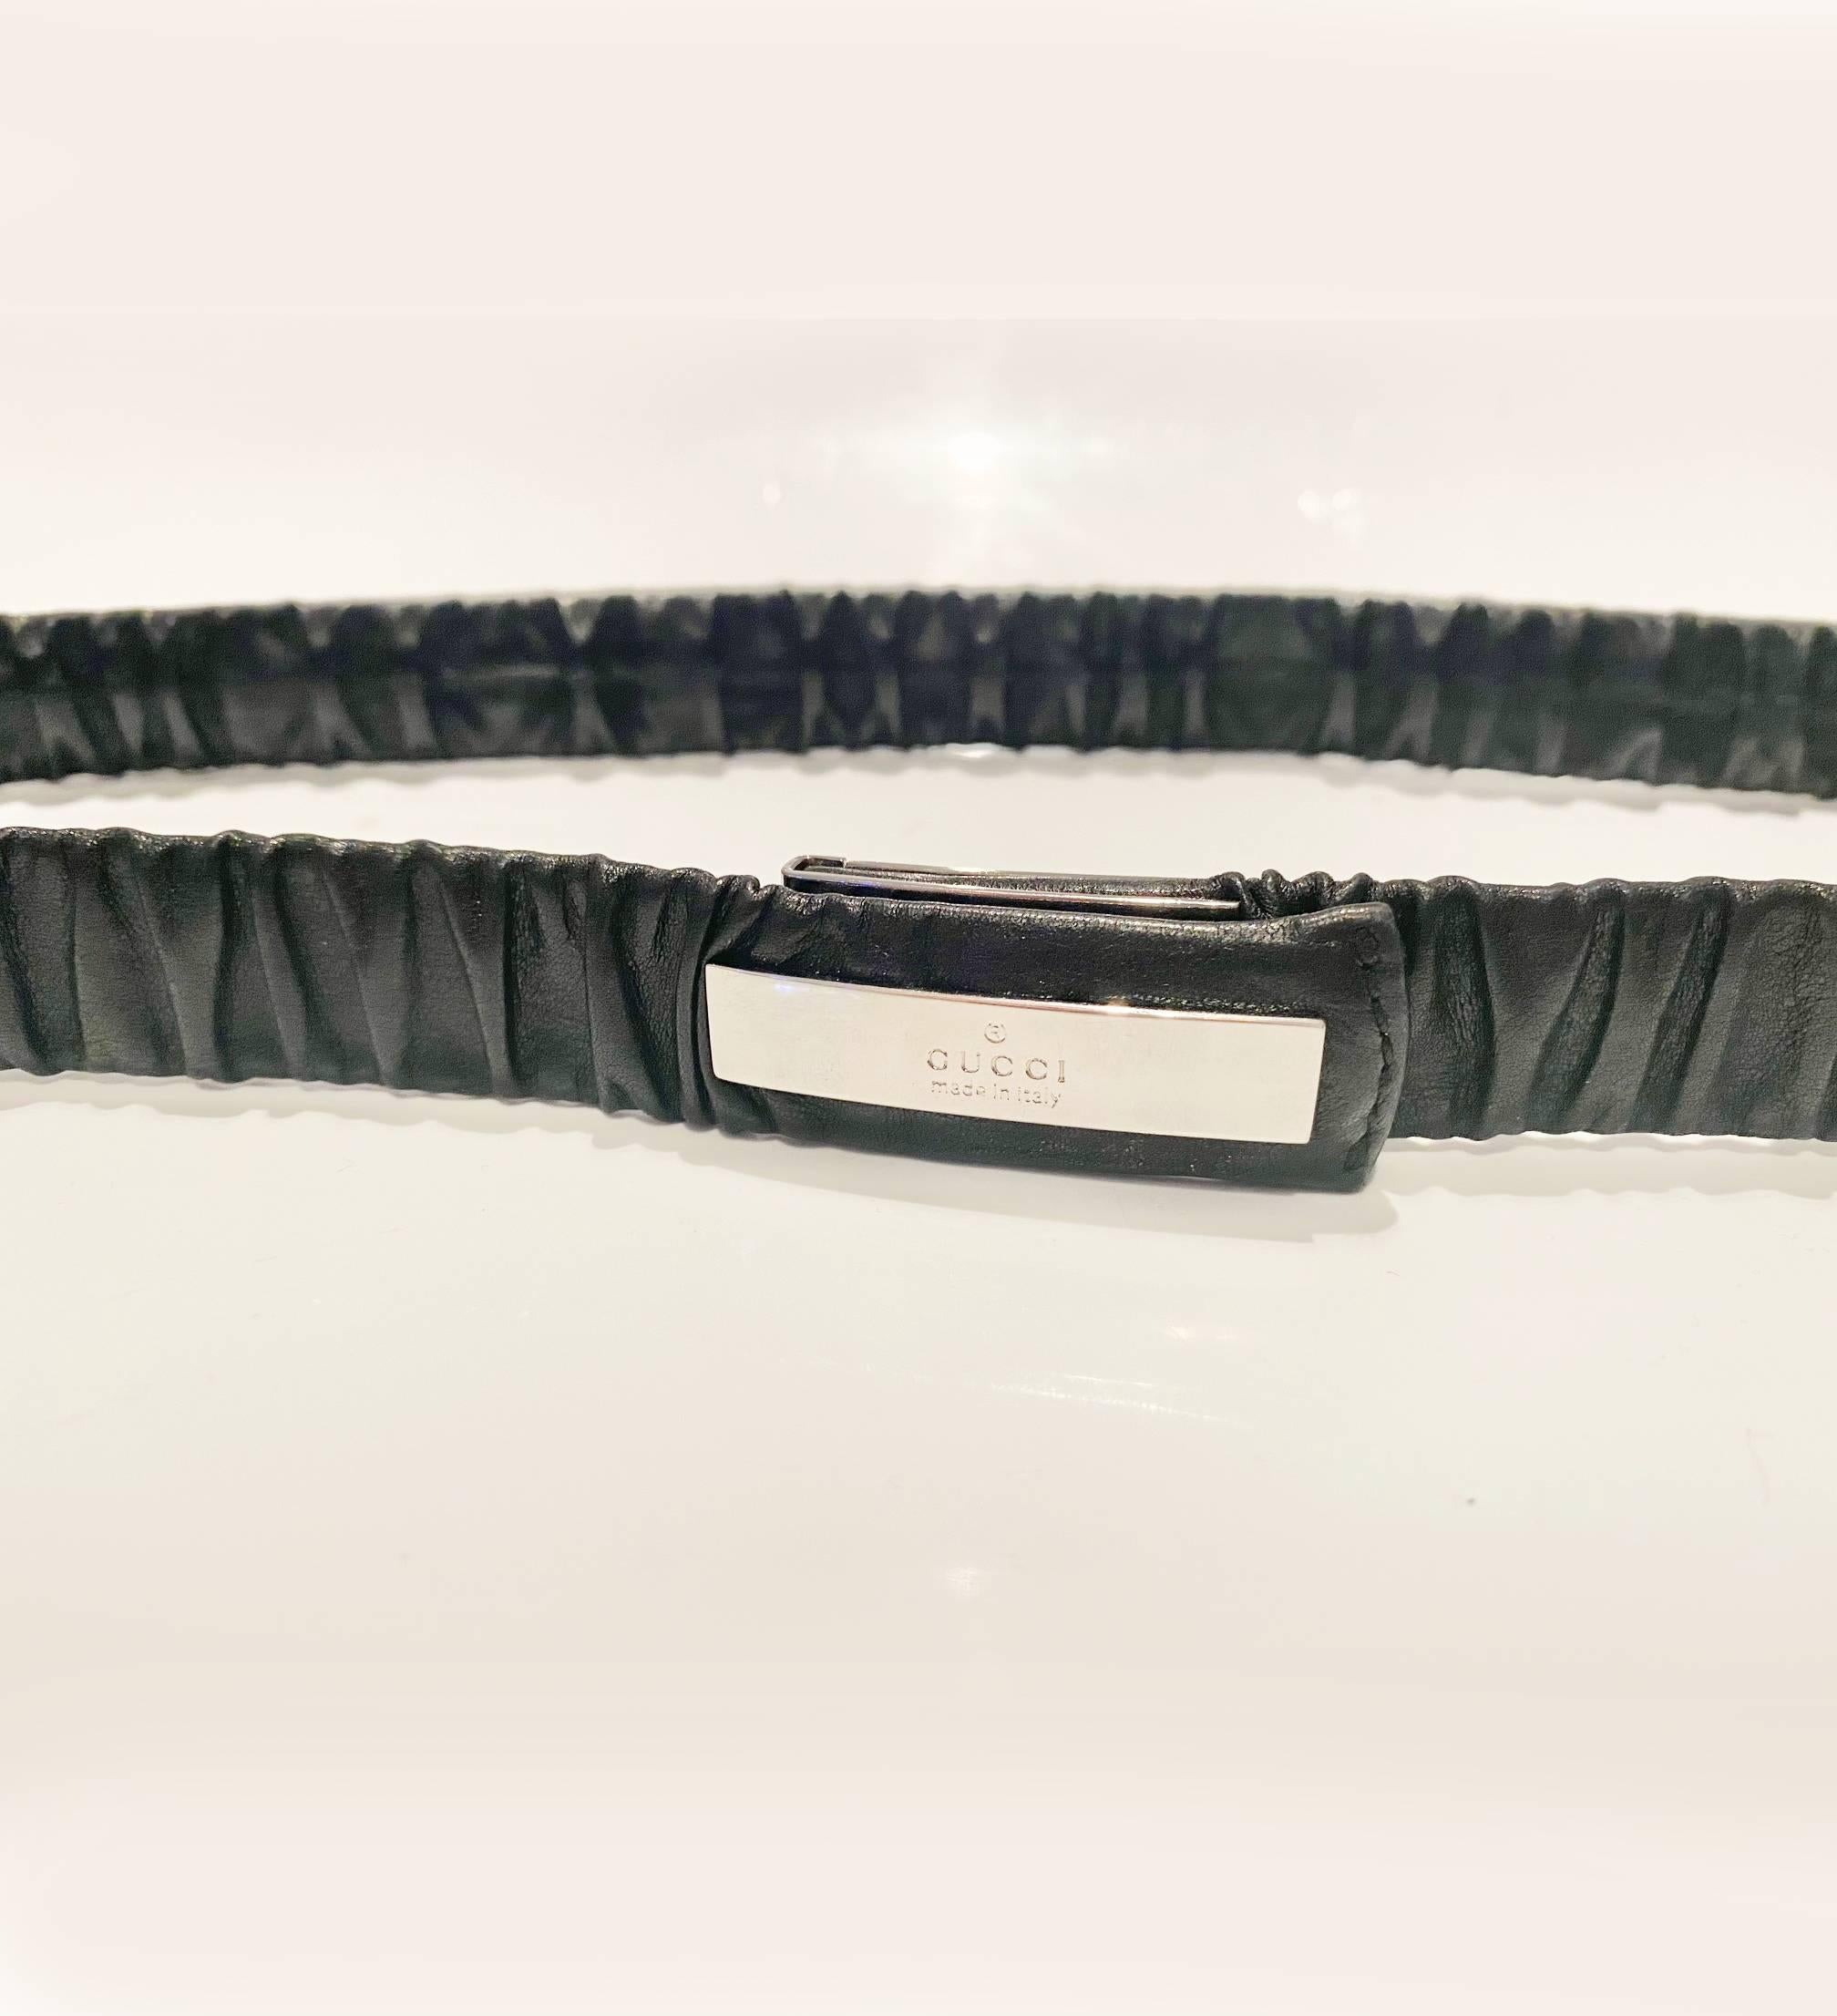 2000s Tom Ford for Gucci Elasticated Black Leather Waist Belt 2